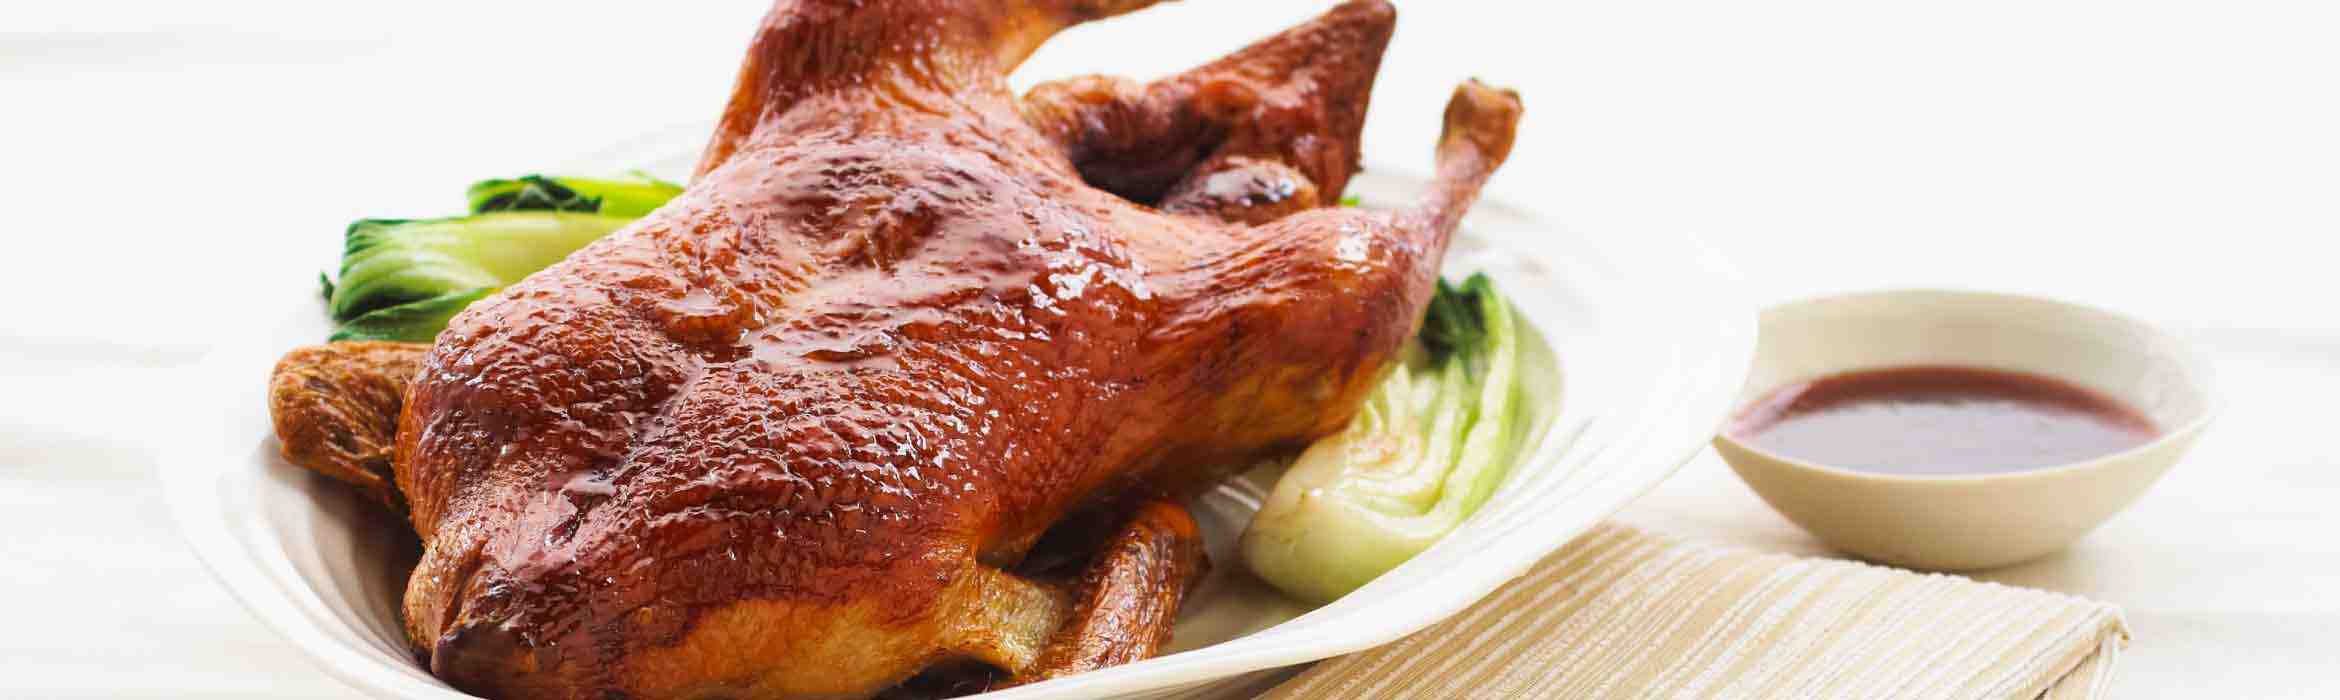 Roasted Aromatic Asian Style Duck Recipe